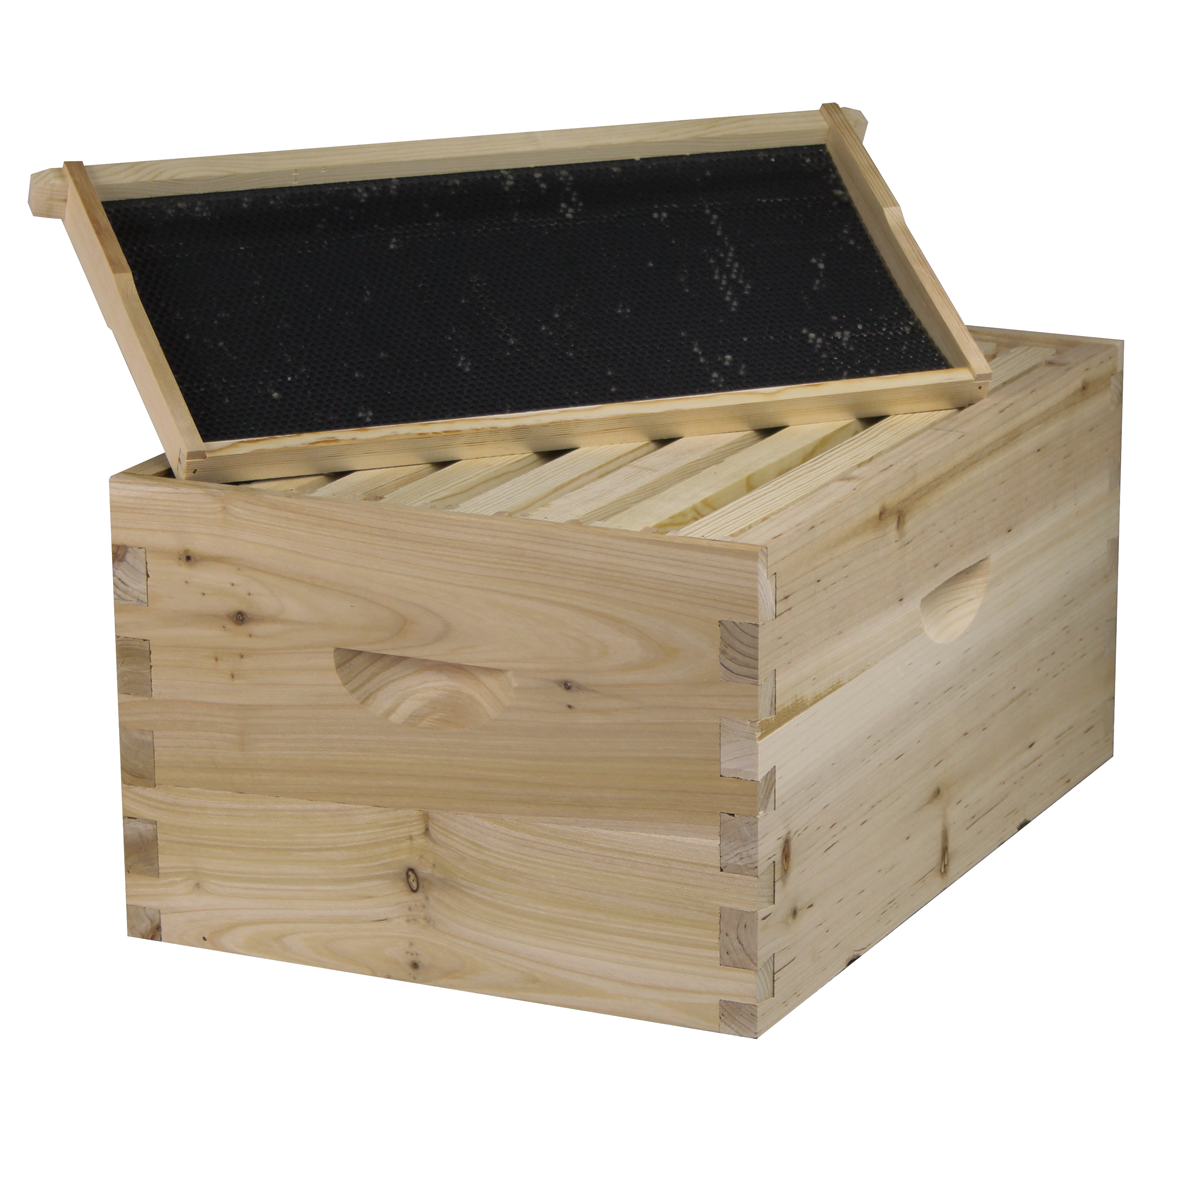 NuBee 8 Frame Deep Brood Box With Frames & Foundations